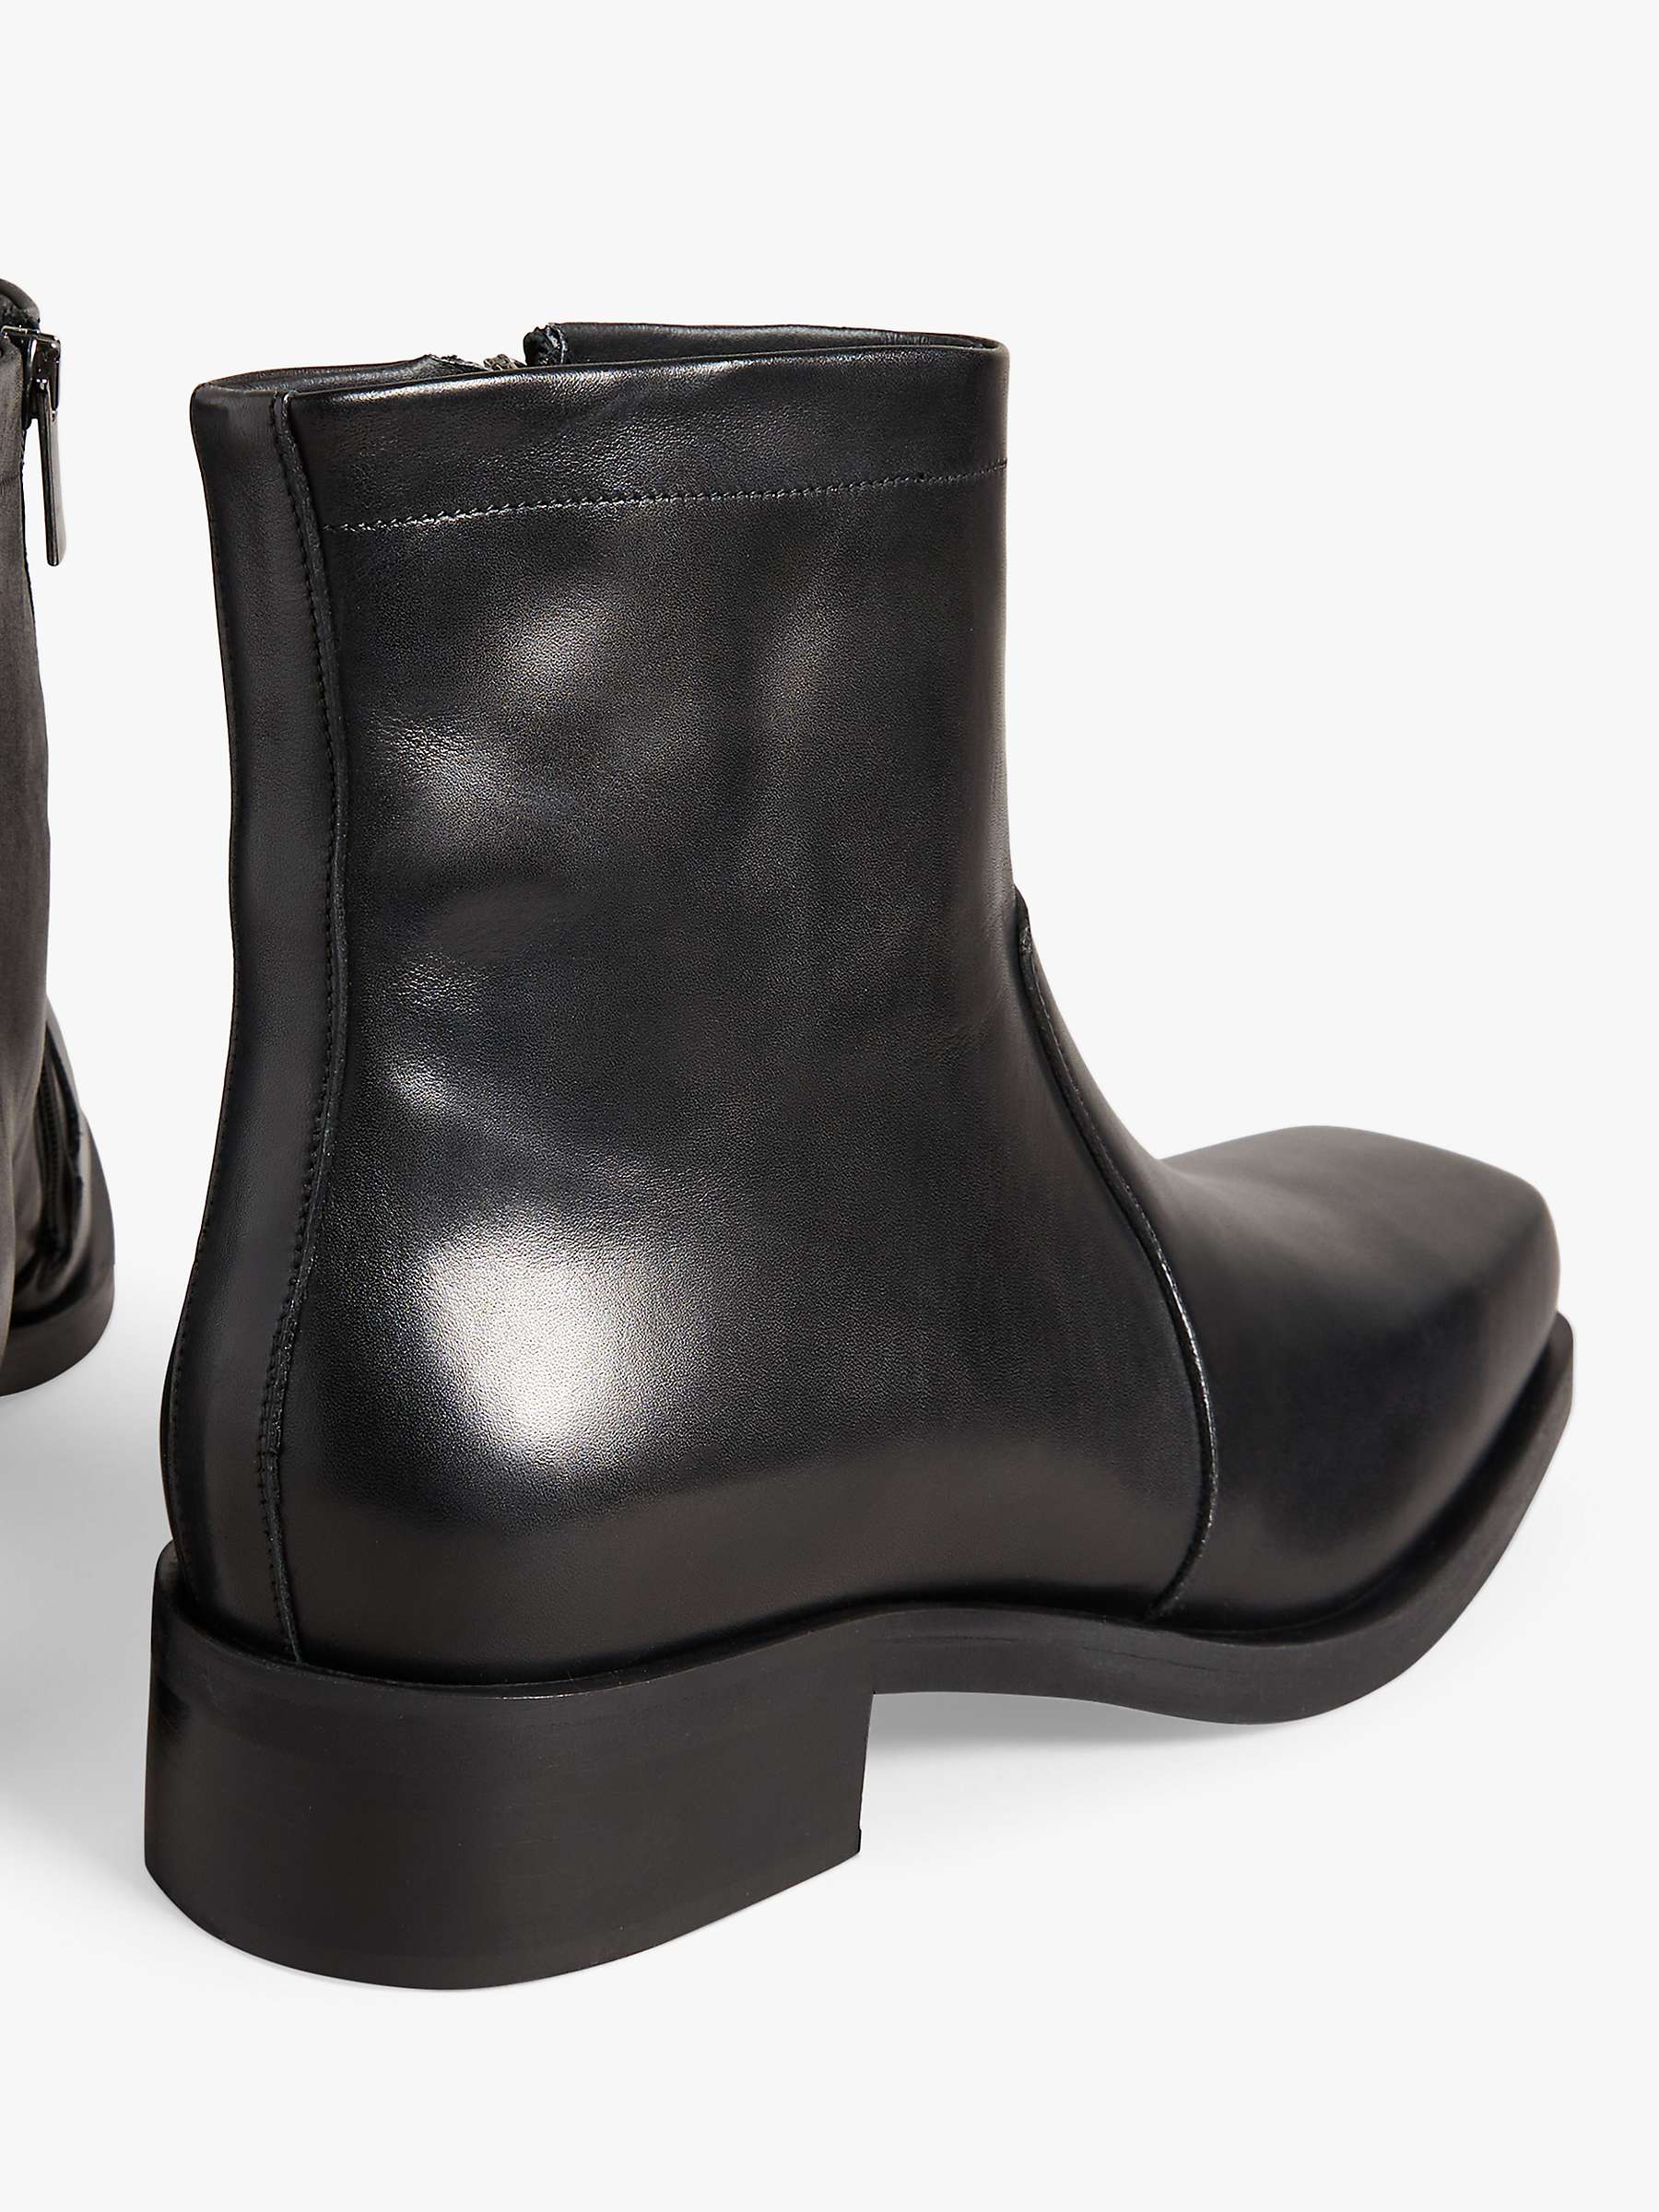 Ted Baker Stann Leather Derby Boots, Black at John Lewis & Partners